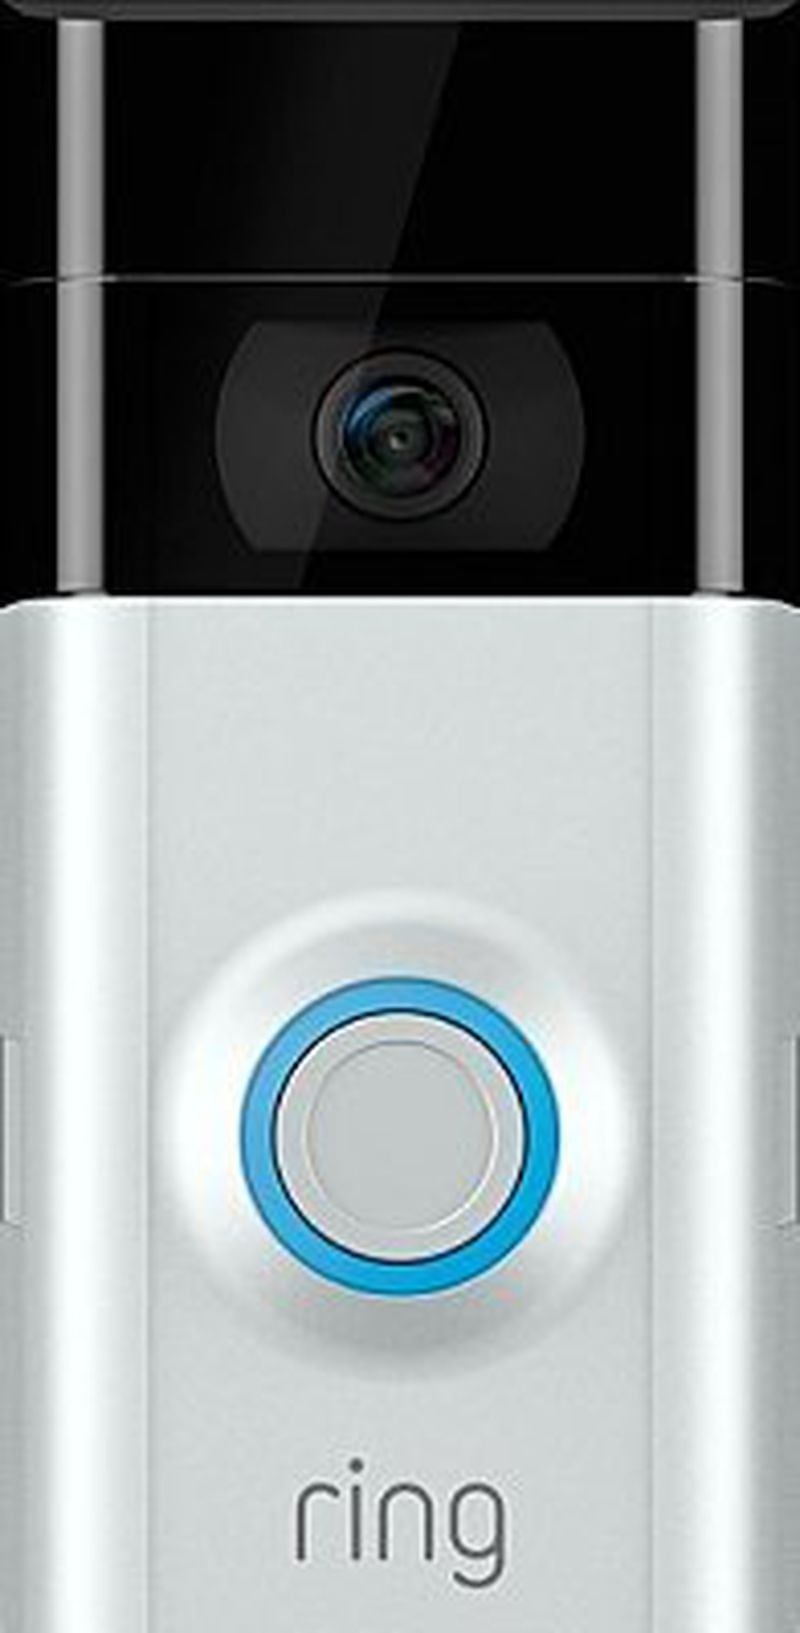 Getting used to living in a larger space can be a little intimidating. Ring video doorbells are one option to help you monitor your front door. You can also connect a list of other Ring devices to add security throughout the rest of your home.